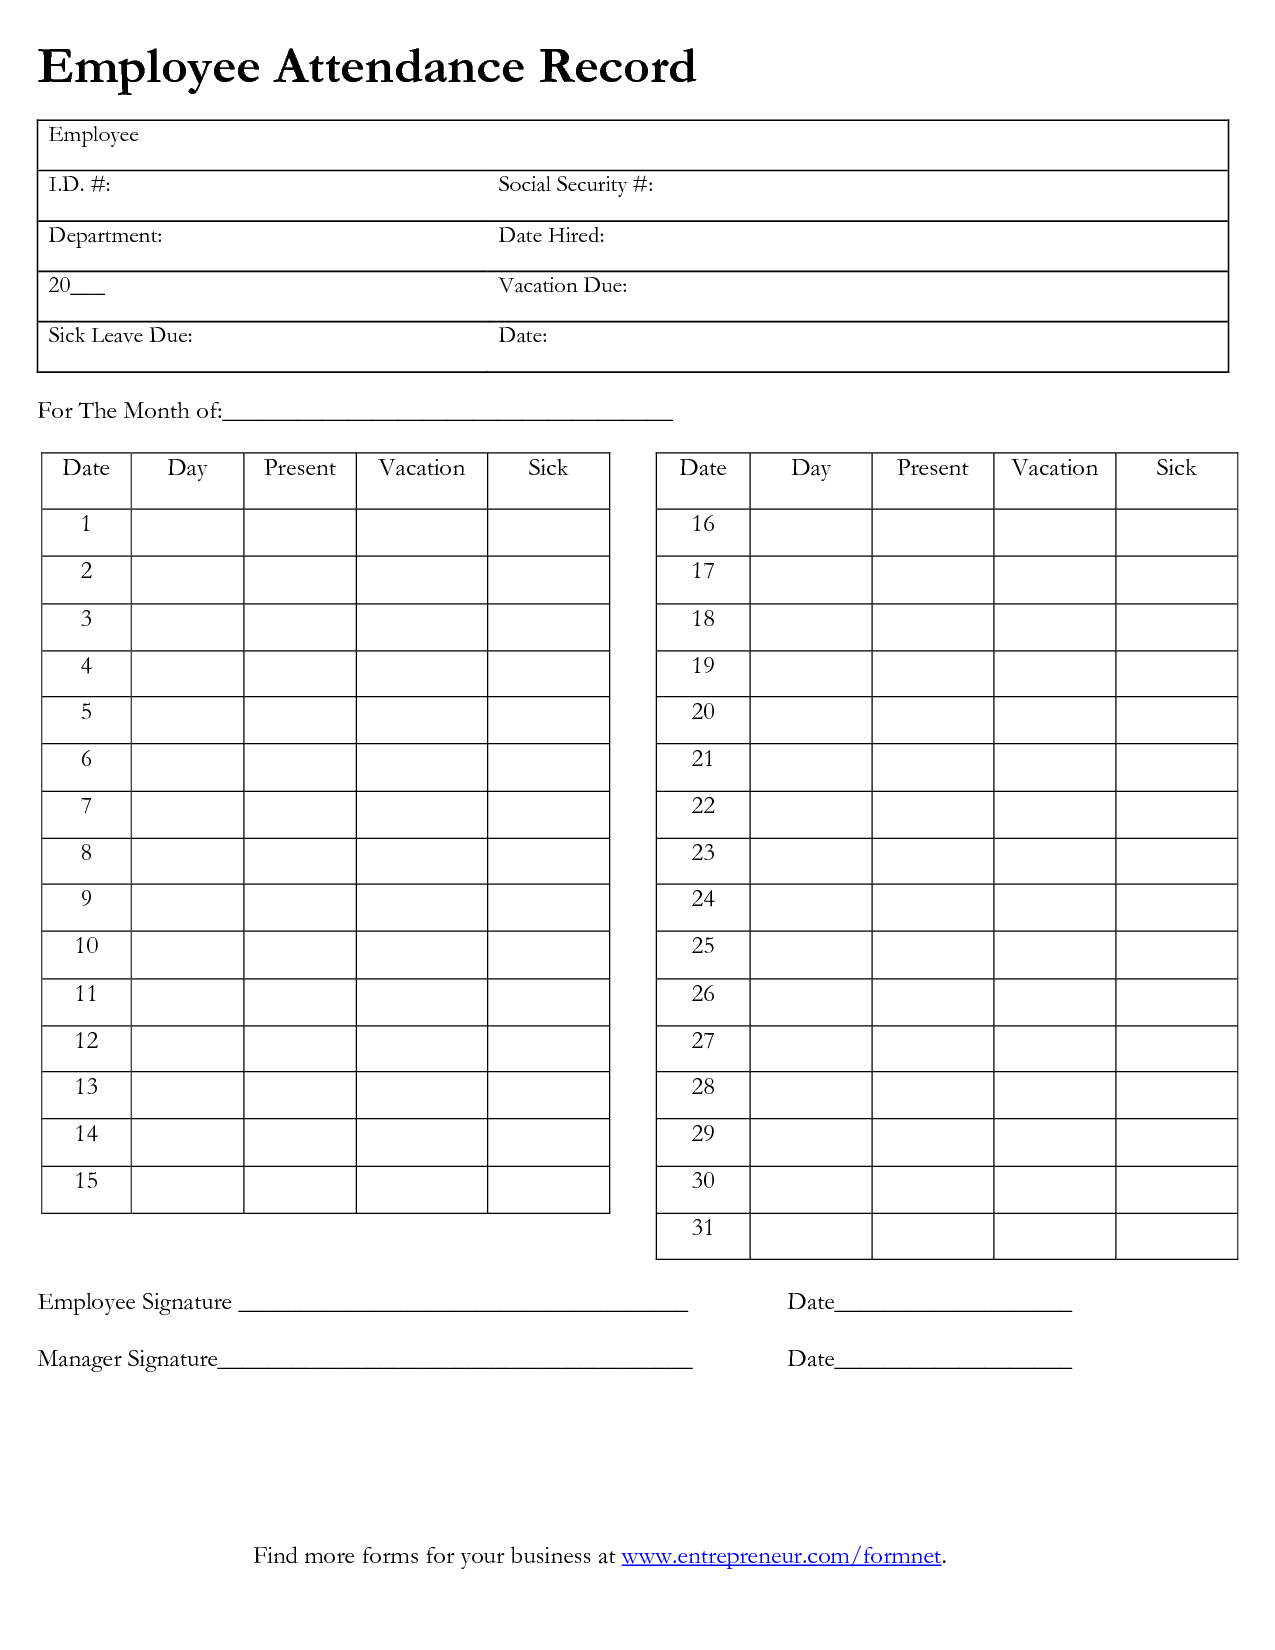 employee attendance record template   Gecce.tackletarts.co